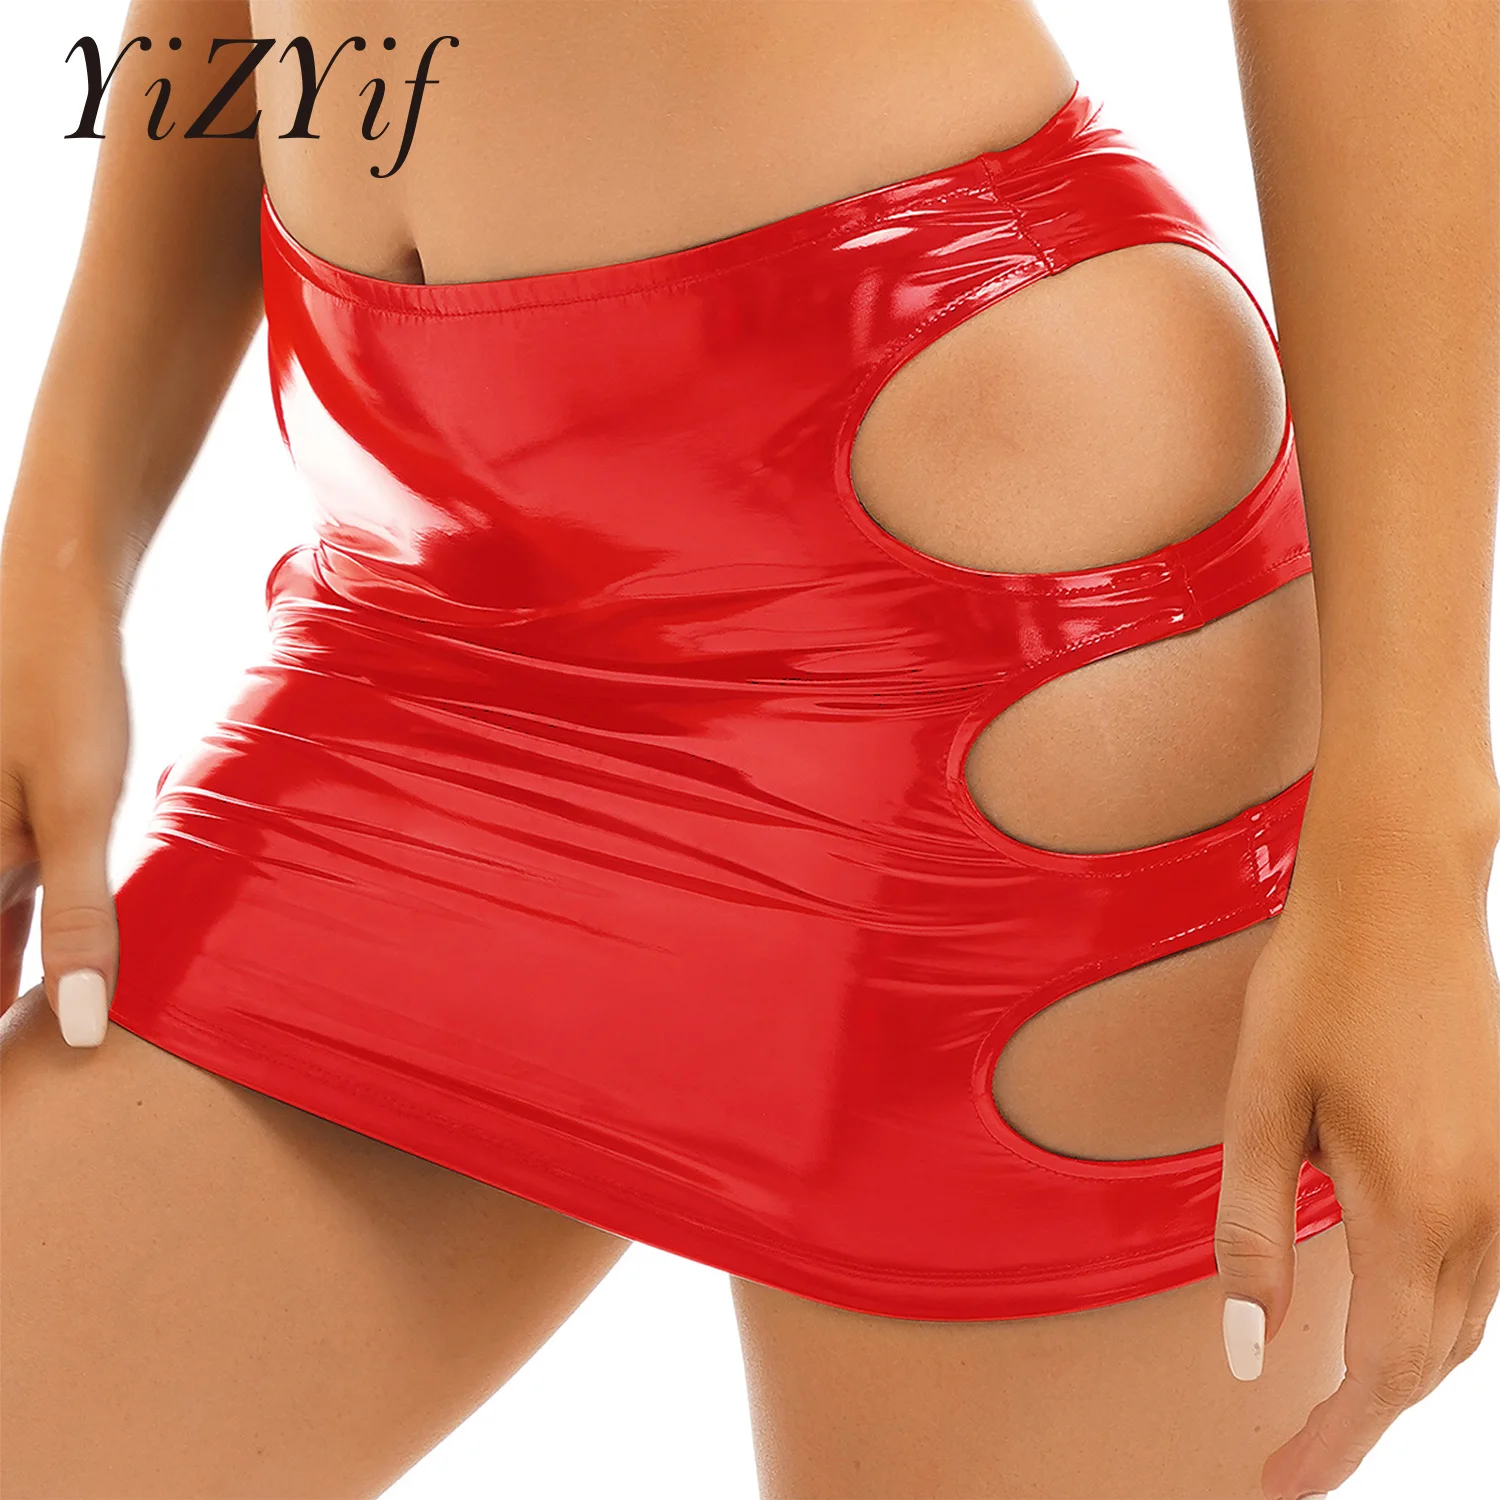 

Womens Fashion Glossy Hollow Out Pencil Skirt Patent Leather Bodycon Miniskirt Wetlook Sexy Party Pole Dancing Clubwear